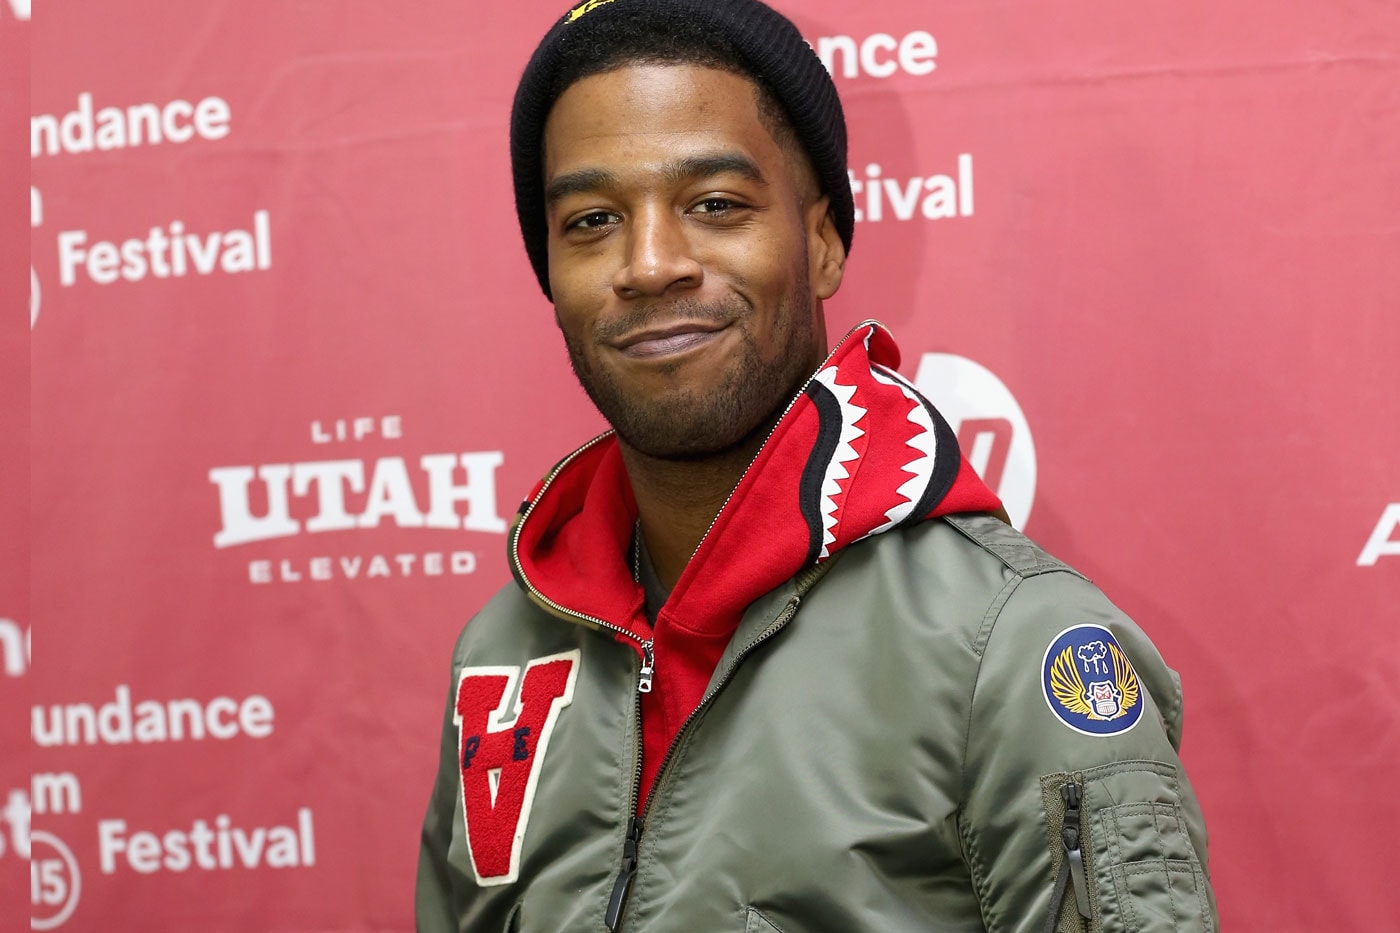 Kid Cudi Weighs In On Kanye West's Tweets About Apple Music and Tidal's Beef